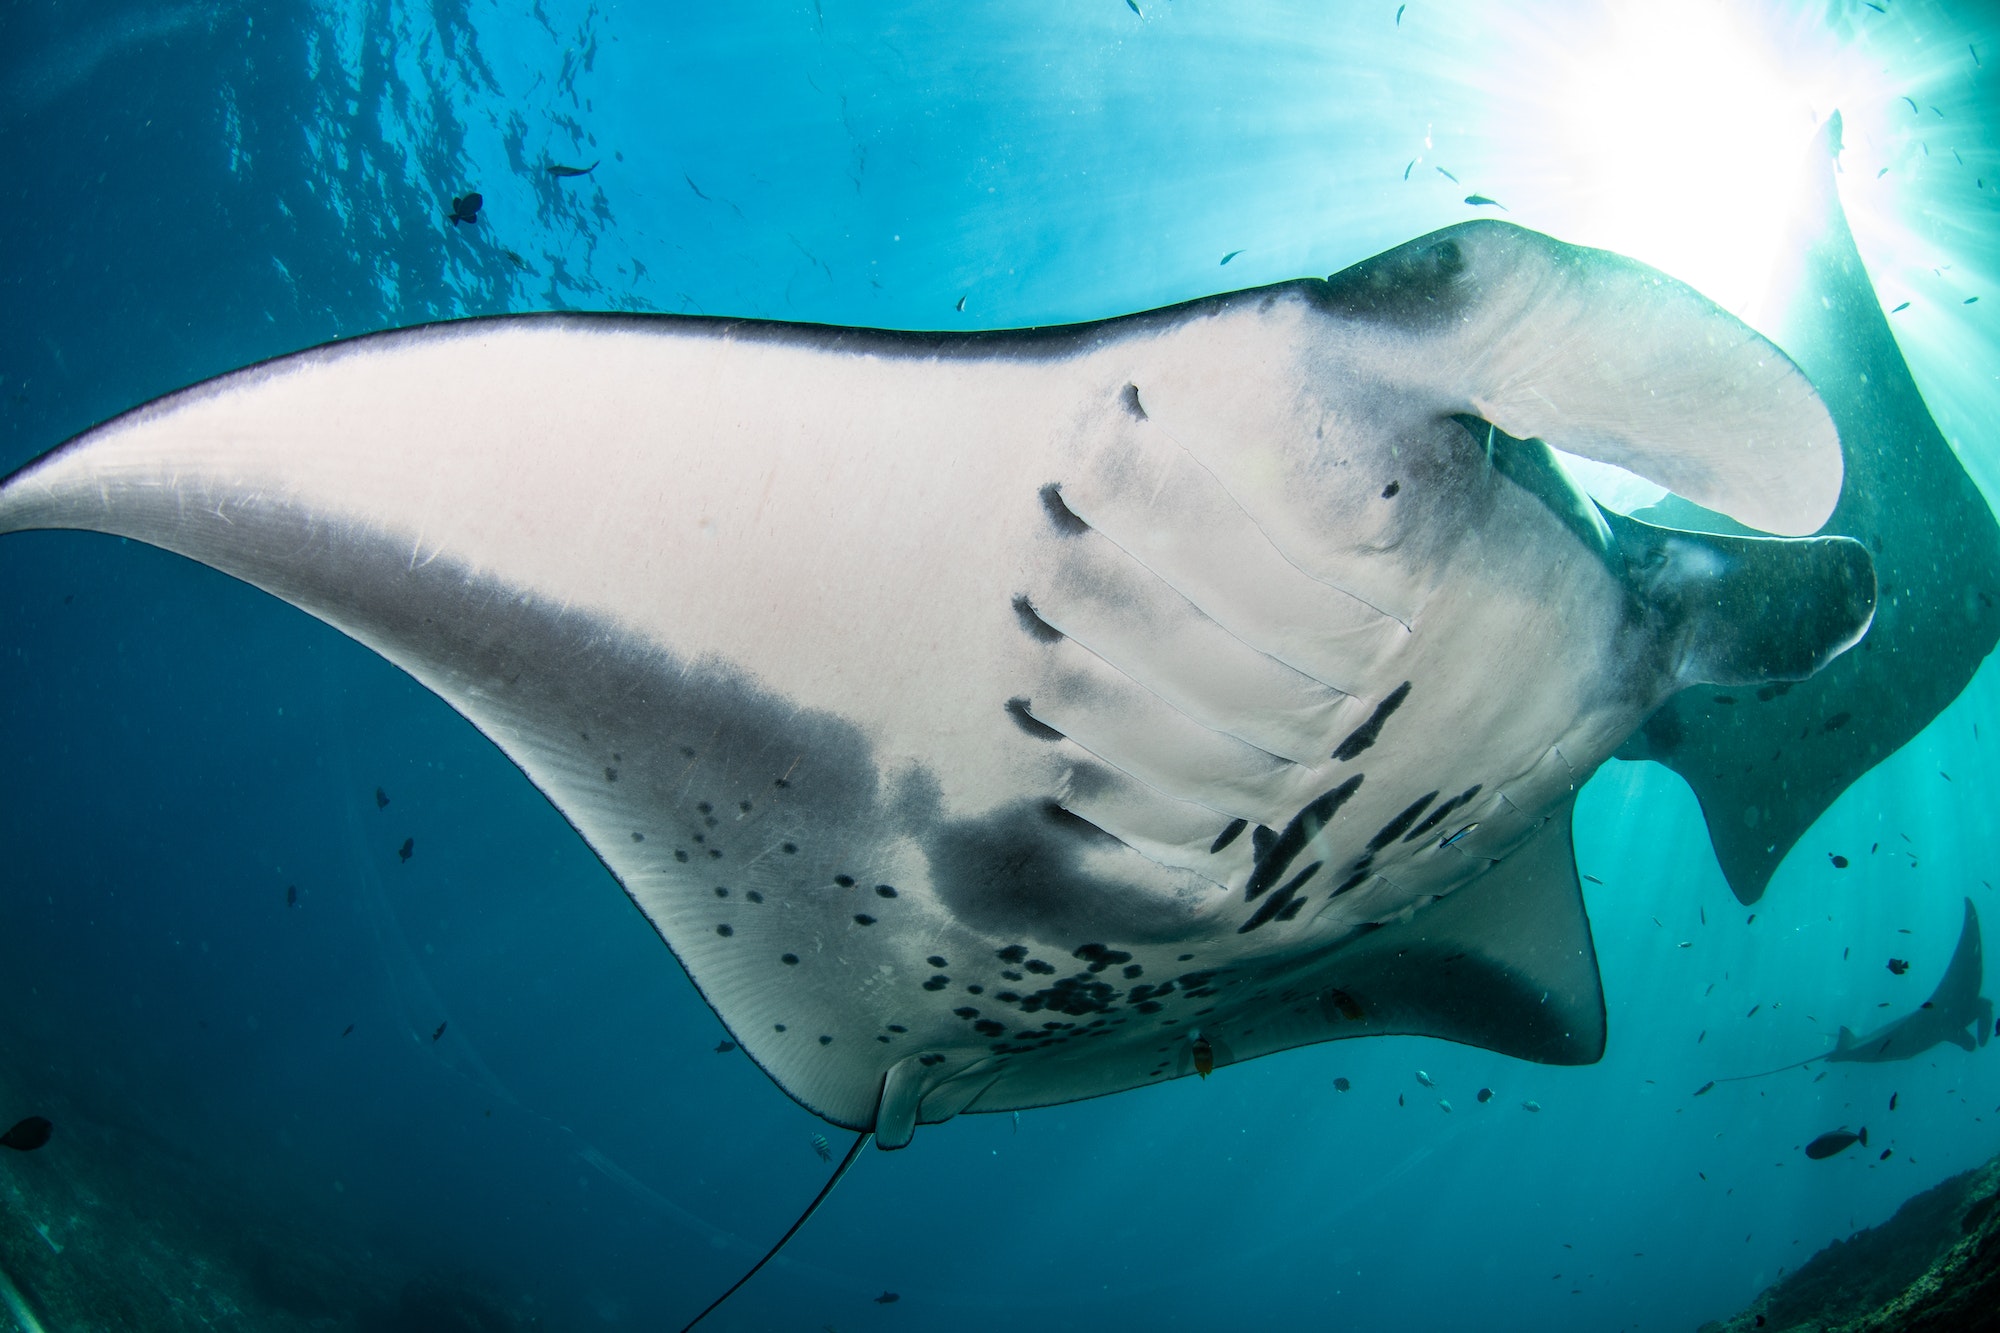 Beautiful shot of a Manta ray fish living underwater in Bali, Indonesia